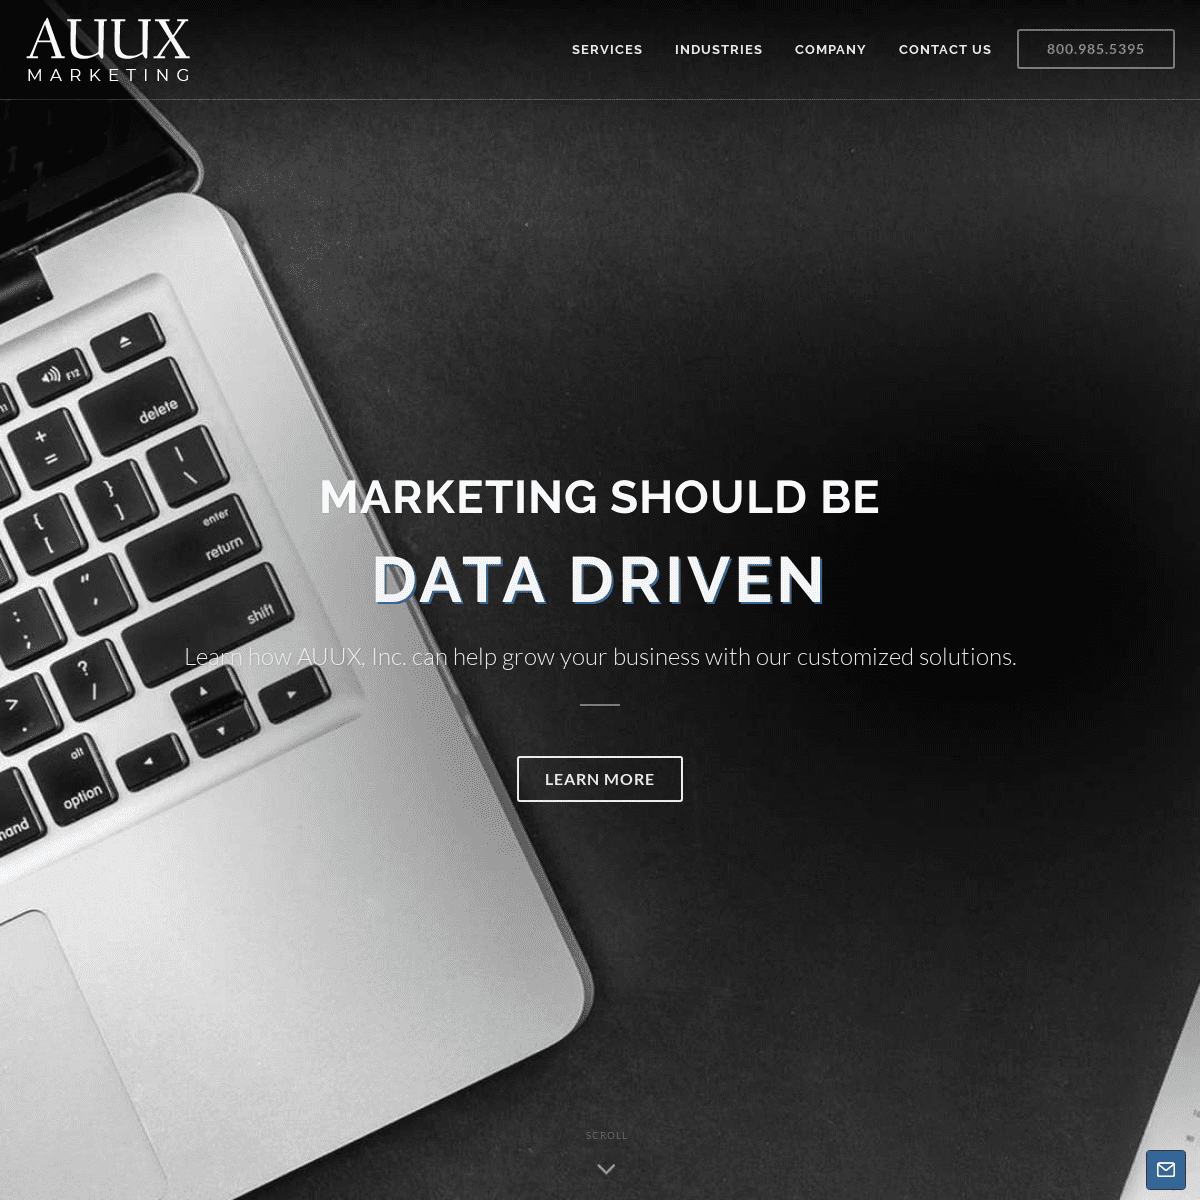 AUUX Marketing Agency | Marketing for Small to Medium Sized Businesses